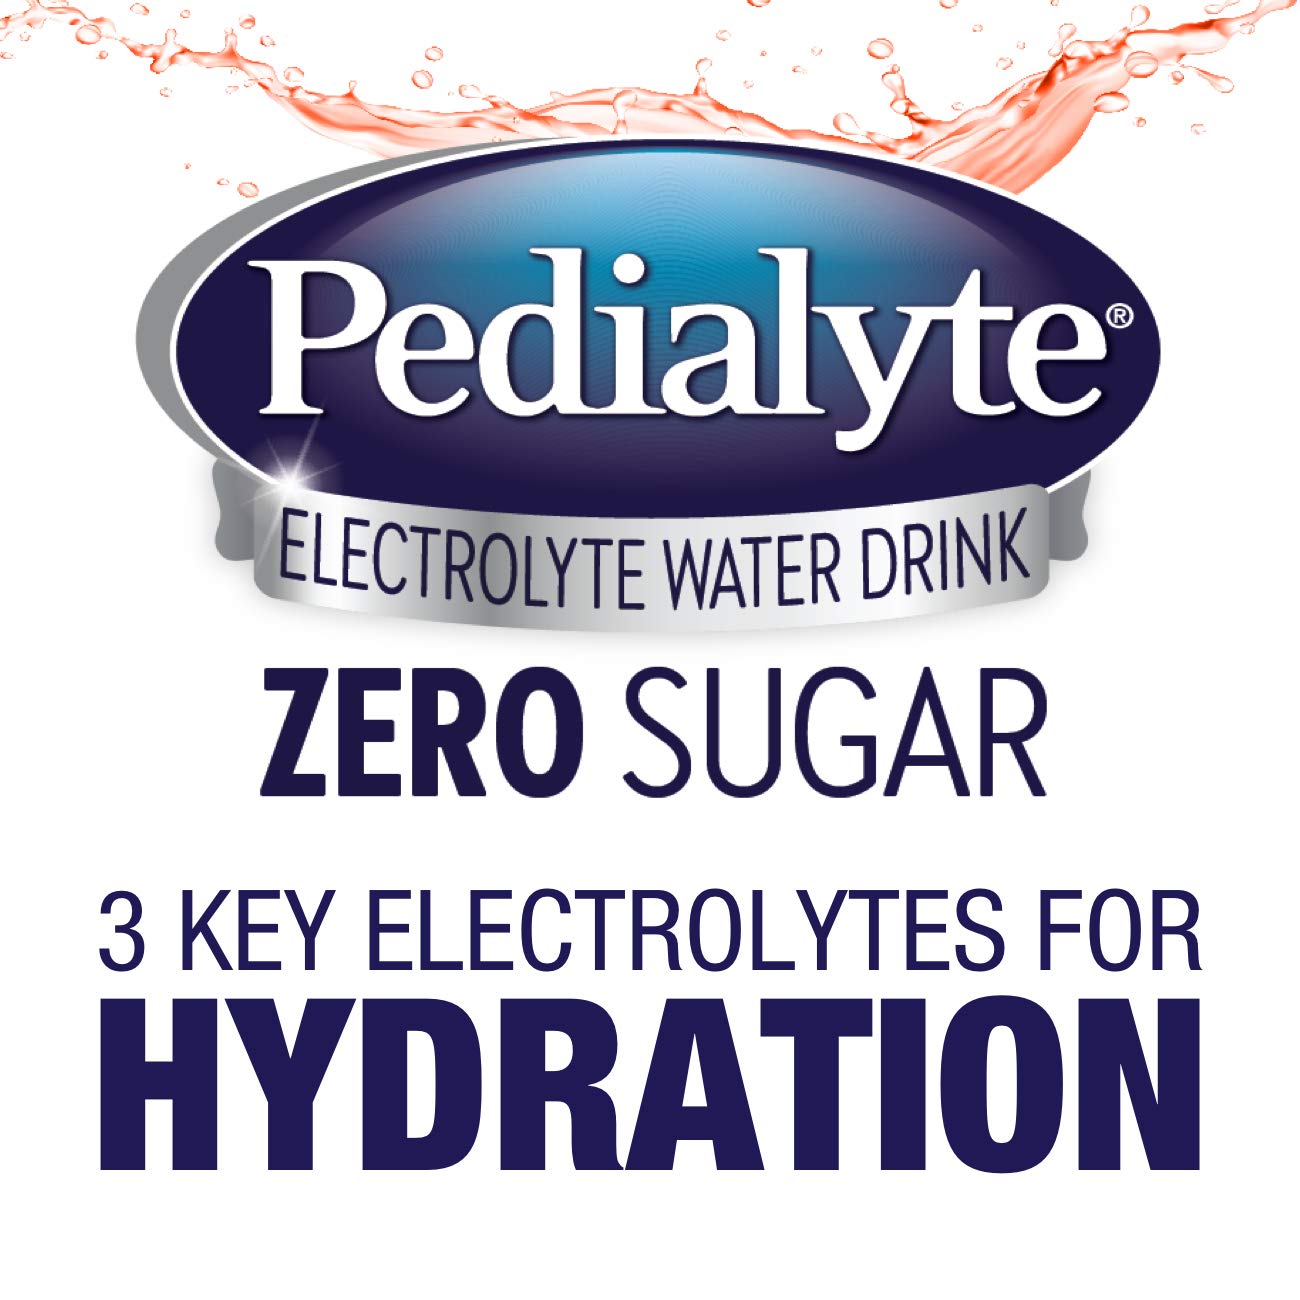 Pedialyte Electrolyte Water with Zero Sugar, Hydration with 3 Key Electrolytes & Zinc for Immune Support, Fruit Punch, 1 Liter, 33.8 Fl Oz (Pack of 4)